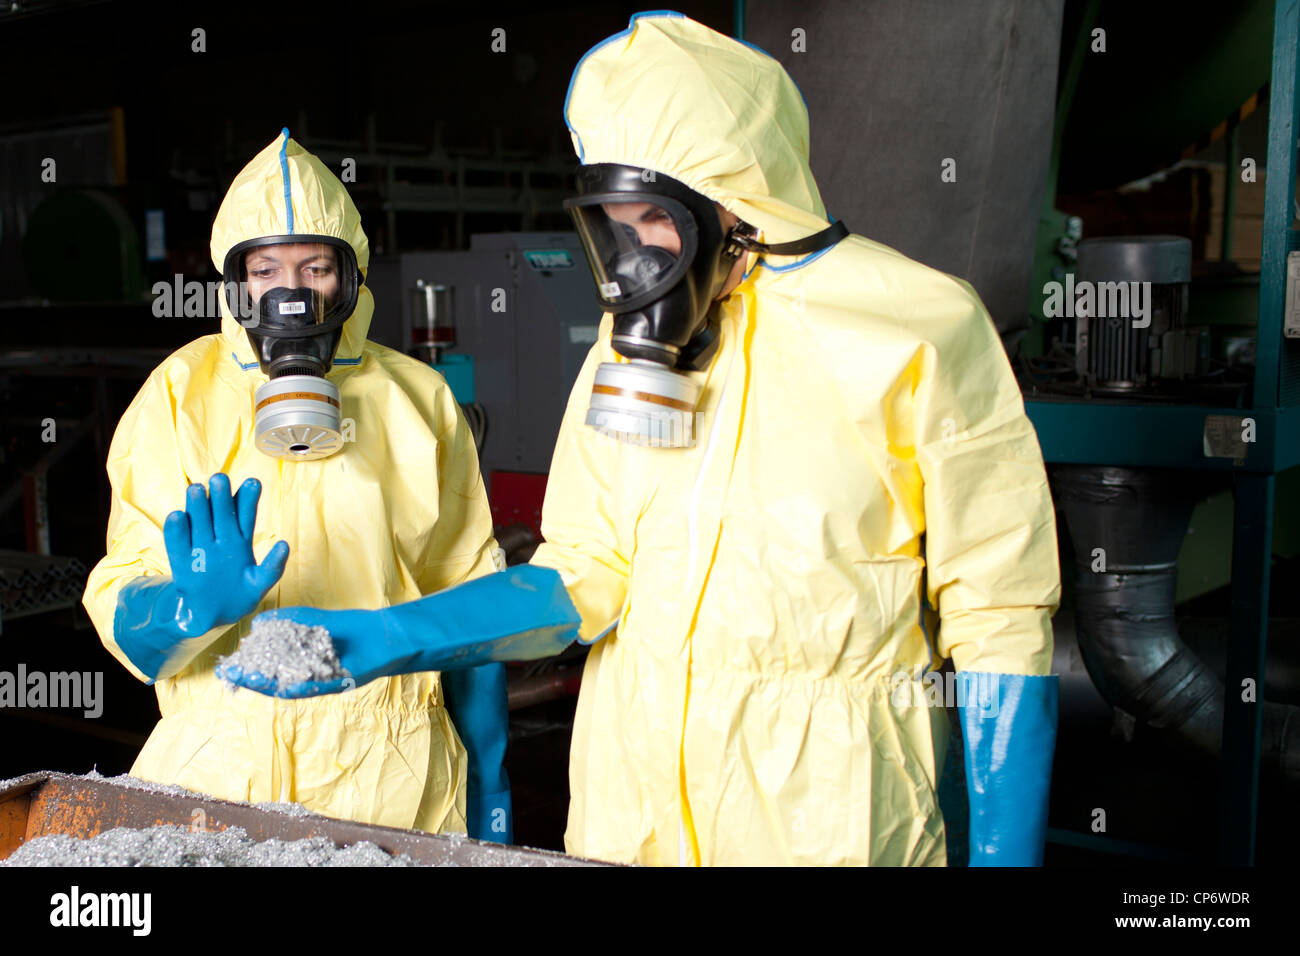 Experts analyzing infested material Stock Photo